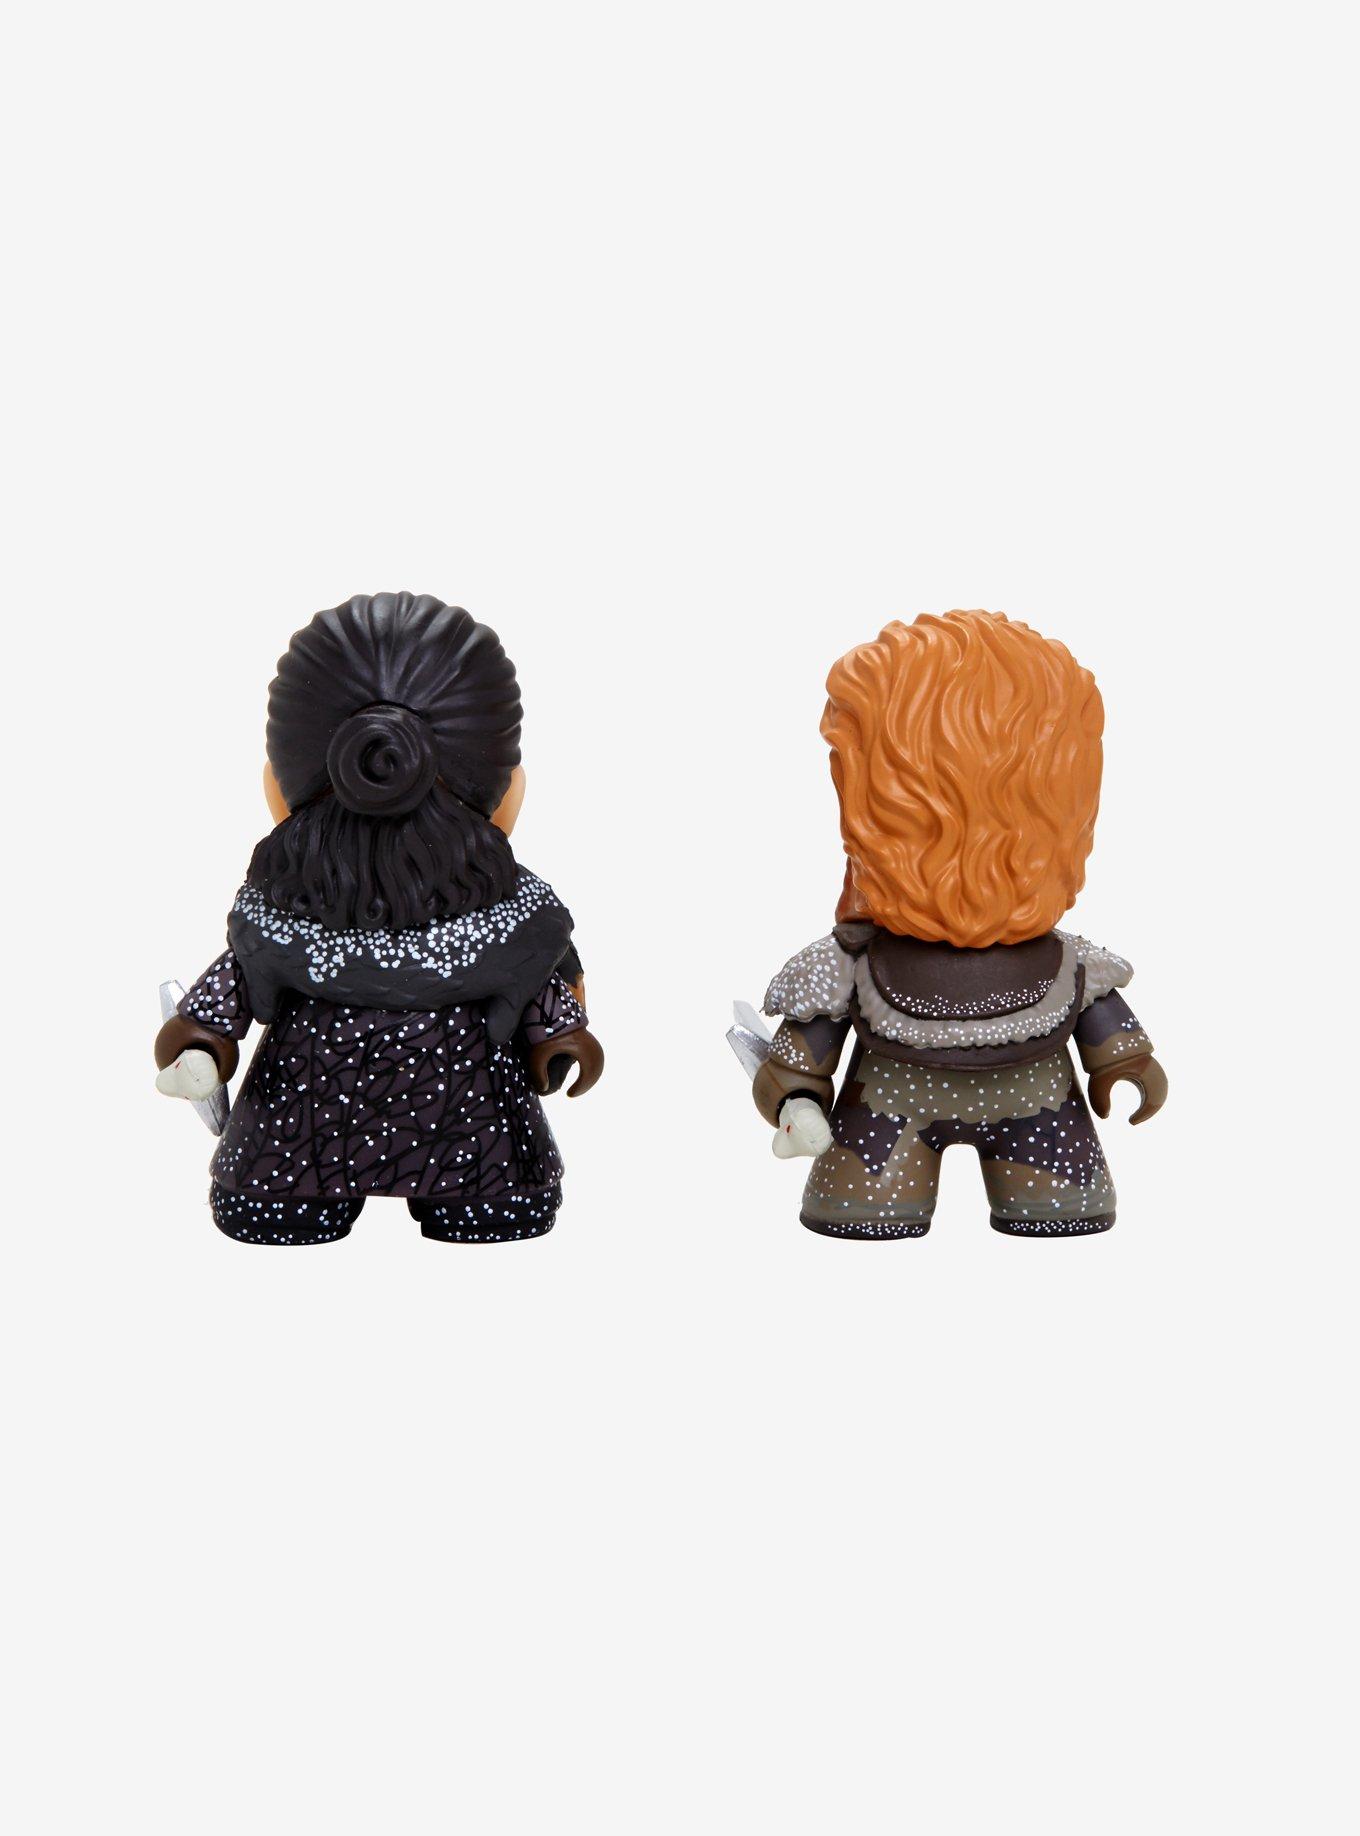 Game Of Thrones Jon Snow & Tormund Giantsbane Snow Covered 3 Inch Titans Vinyl Figure Twin Pack 2018 Fall Convention Exclusive, , alternate